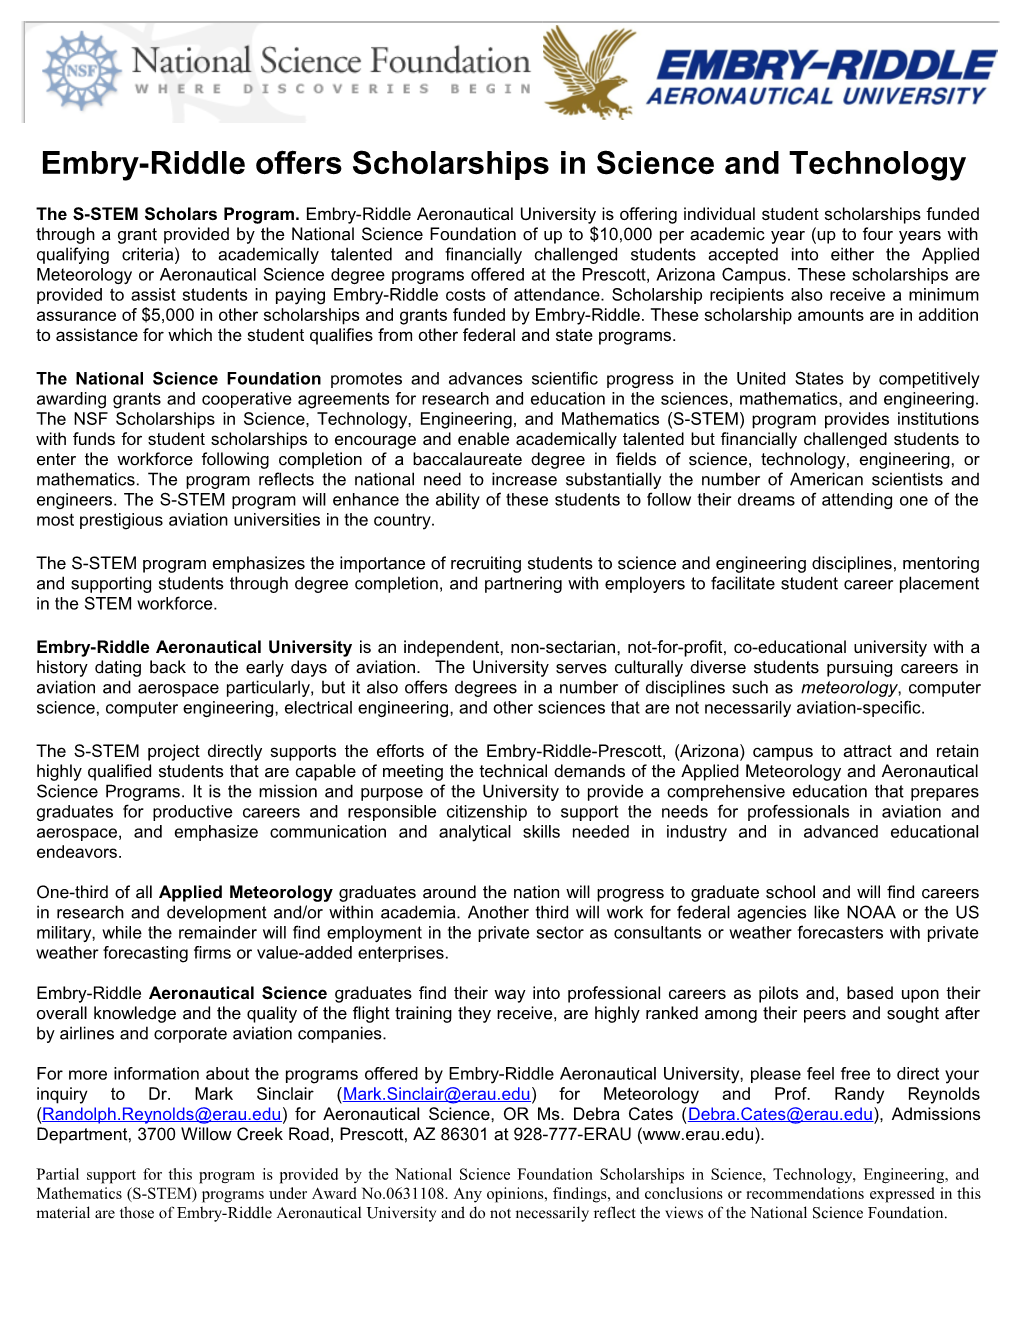 Embry-Riddle Offers Scholarships in Science and Technology